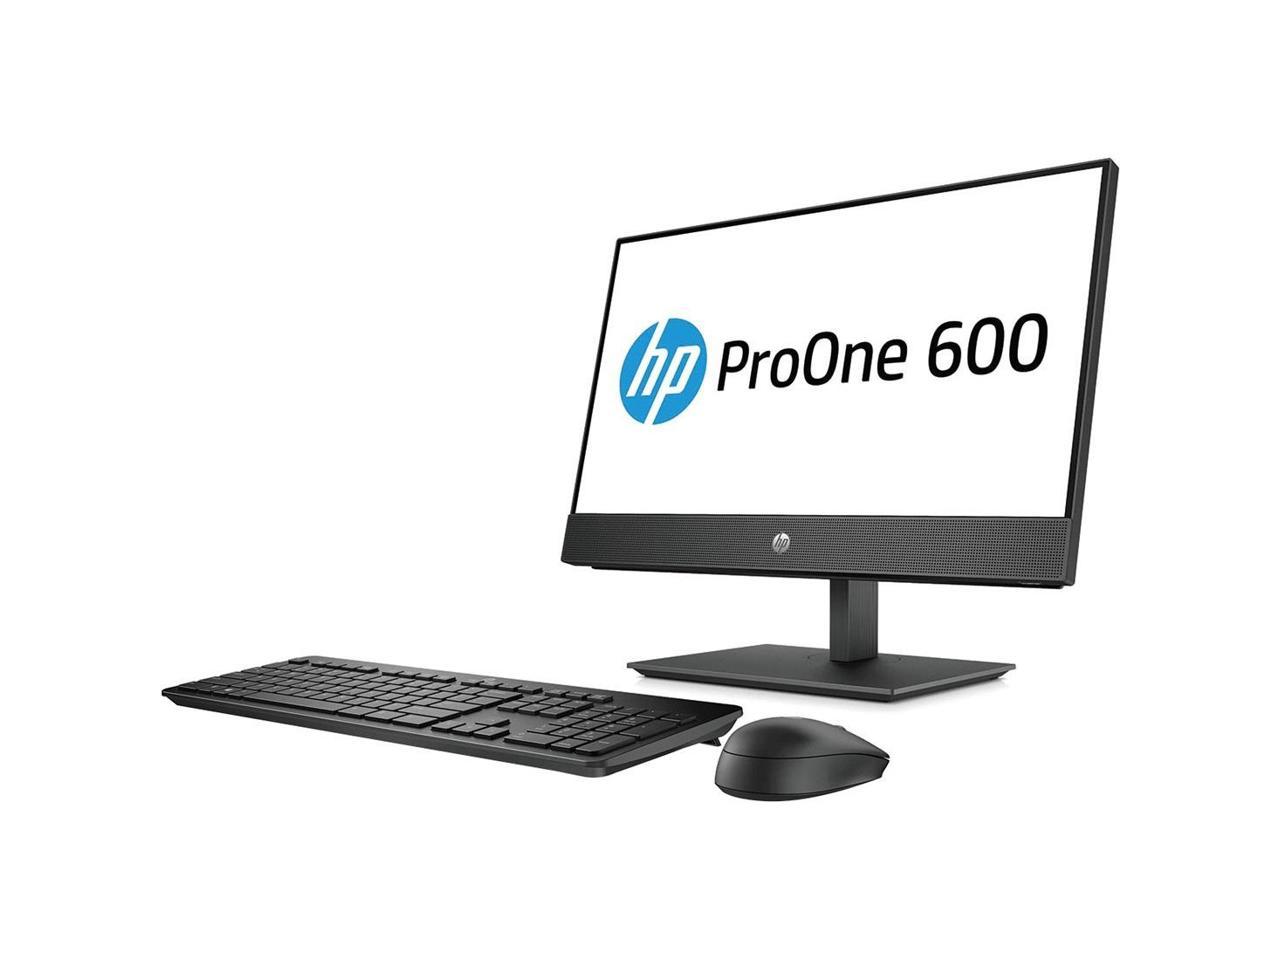 Buy refurbished HP ProOne 400 G4 All in One Desktop online from 3cnz